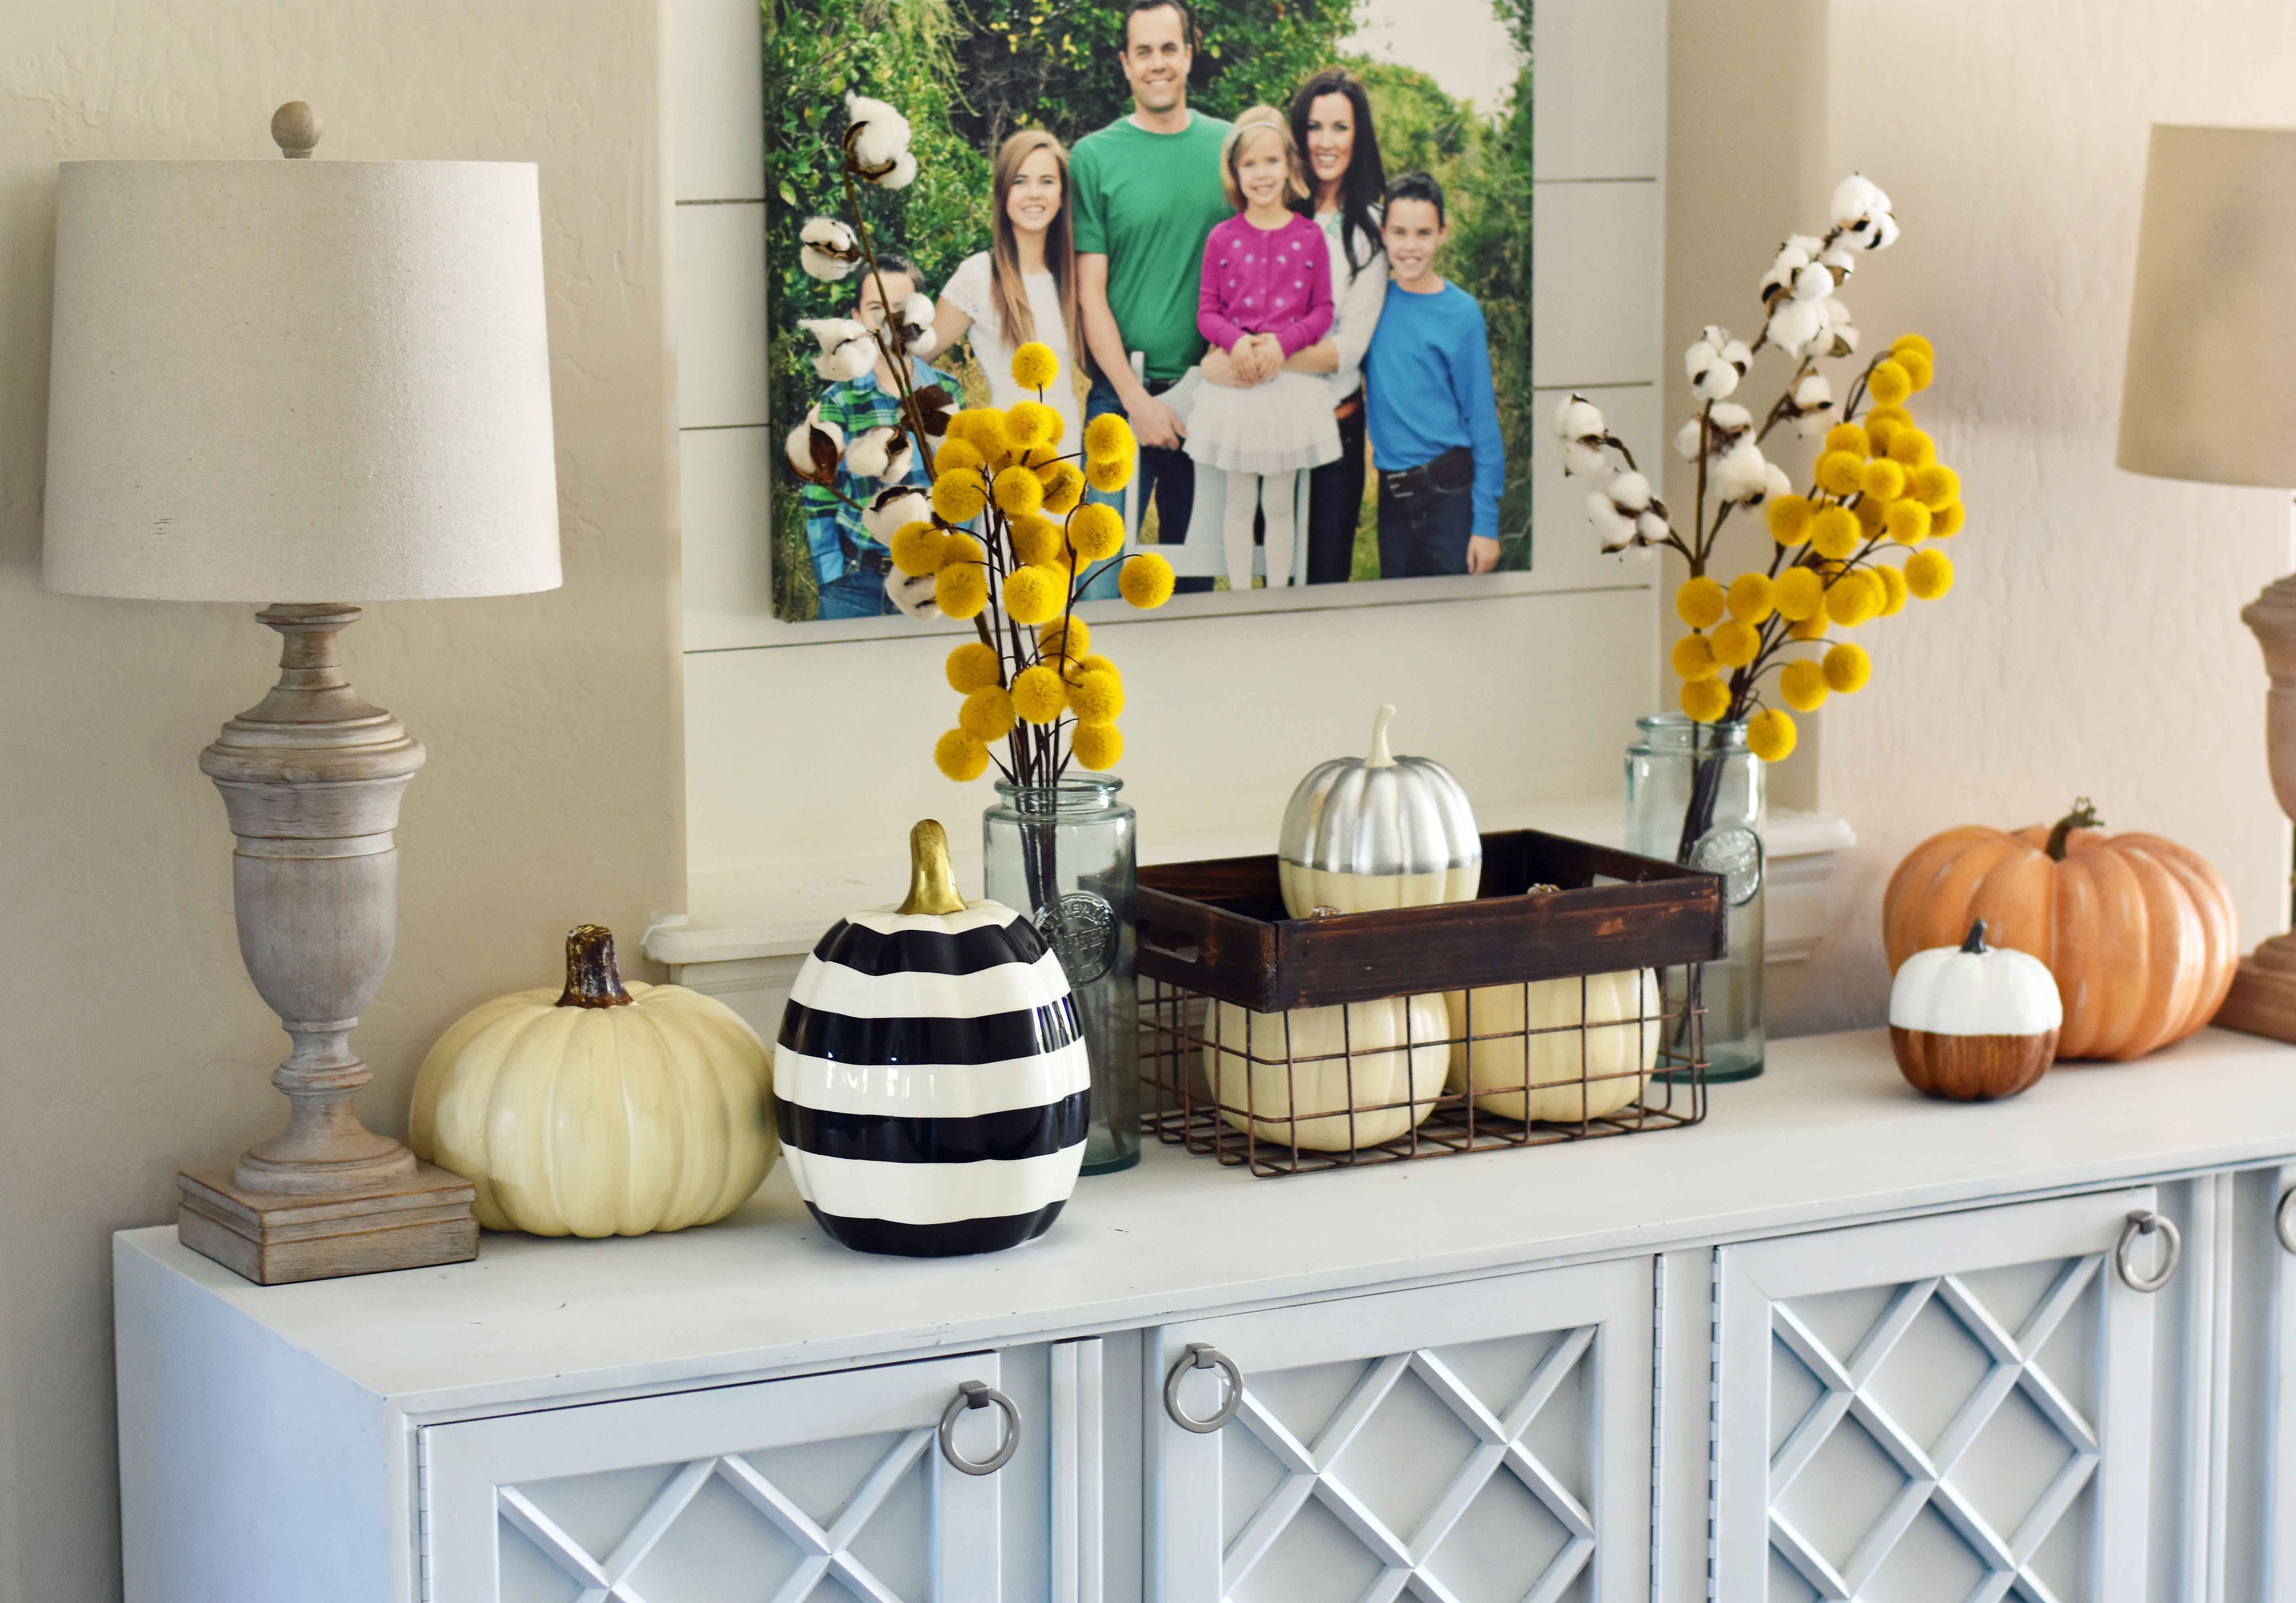 Fall Entry Decor Ideas. Craspedia Yellow Billy Ball Flowers in vintage vases. White pumpkins in wire baskets. Black and white striped pumpkin. Natural lamps, white entry table, and fall decor. Fixer Upper cotton ball stems. How to decorate your home for Fall.